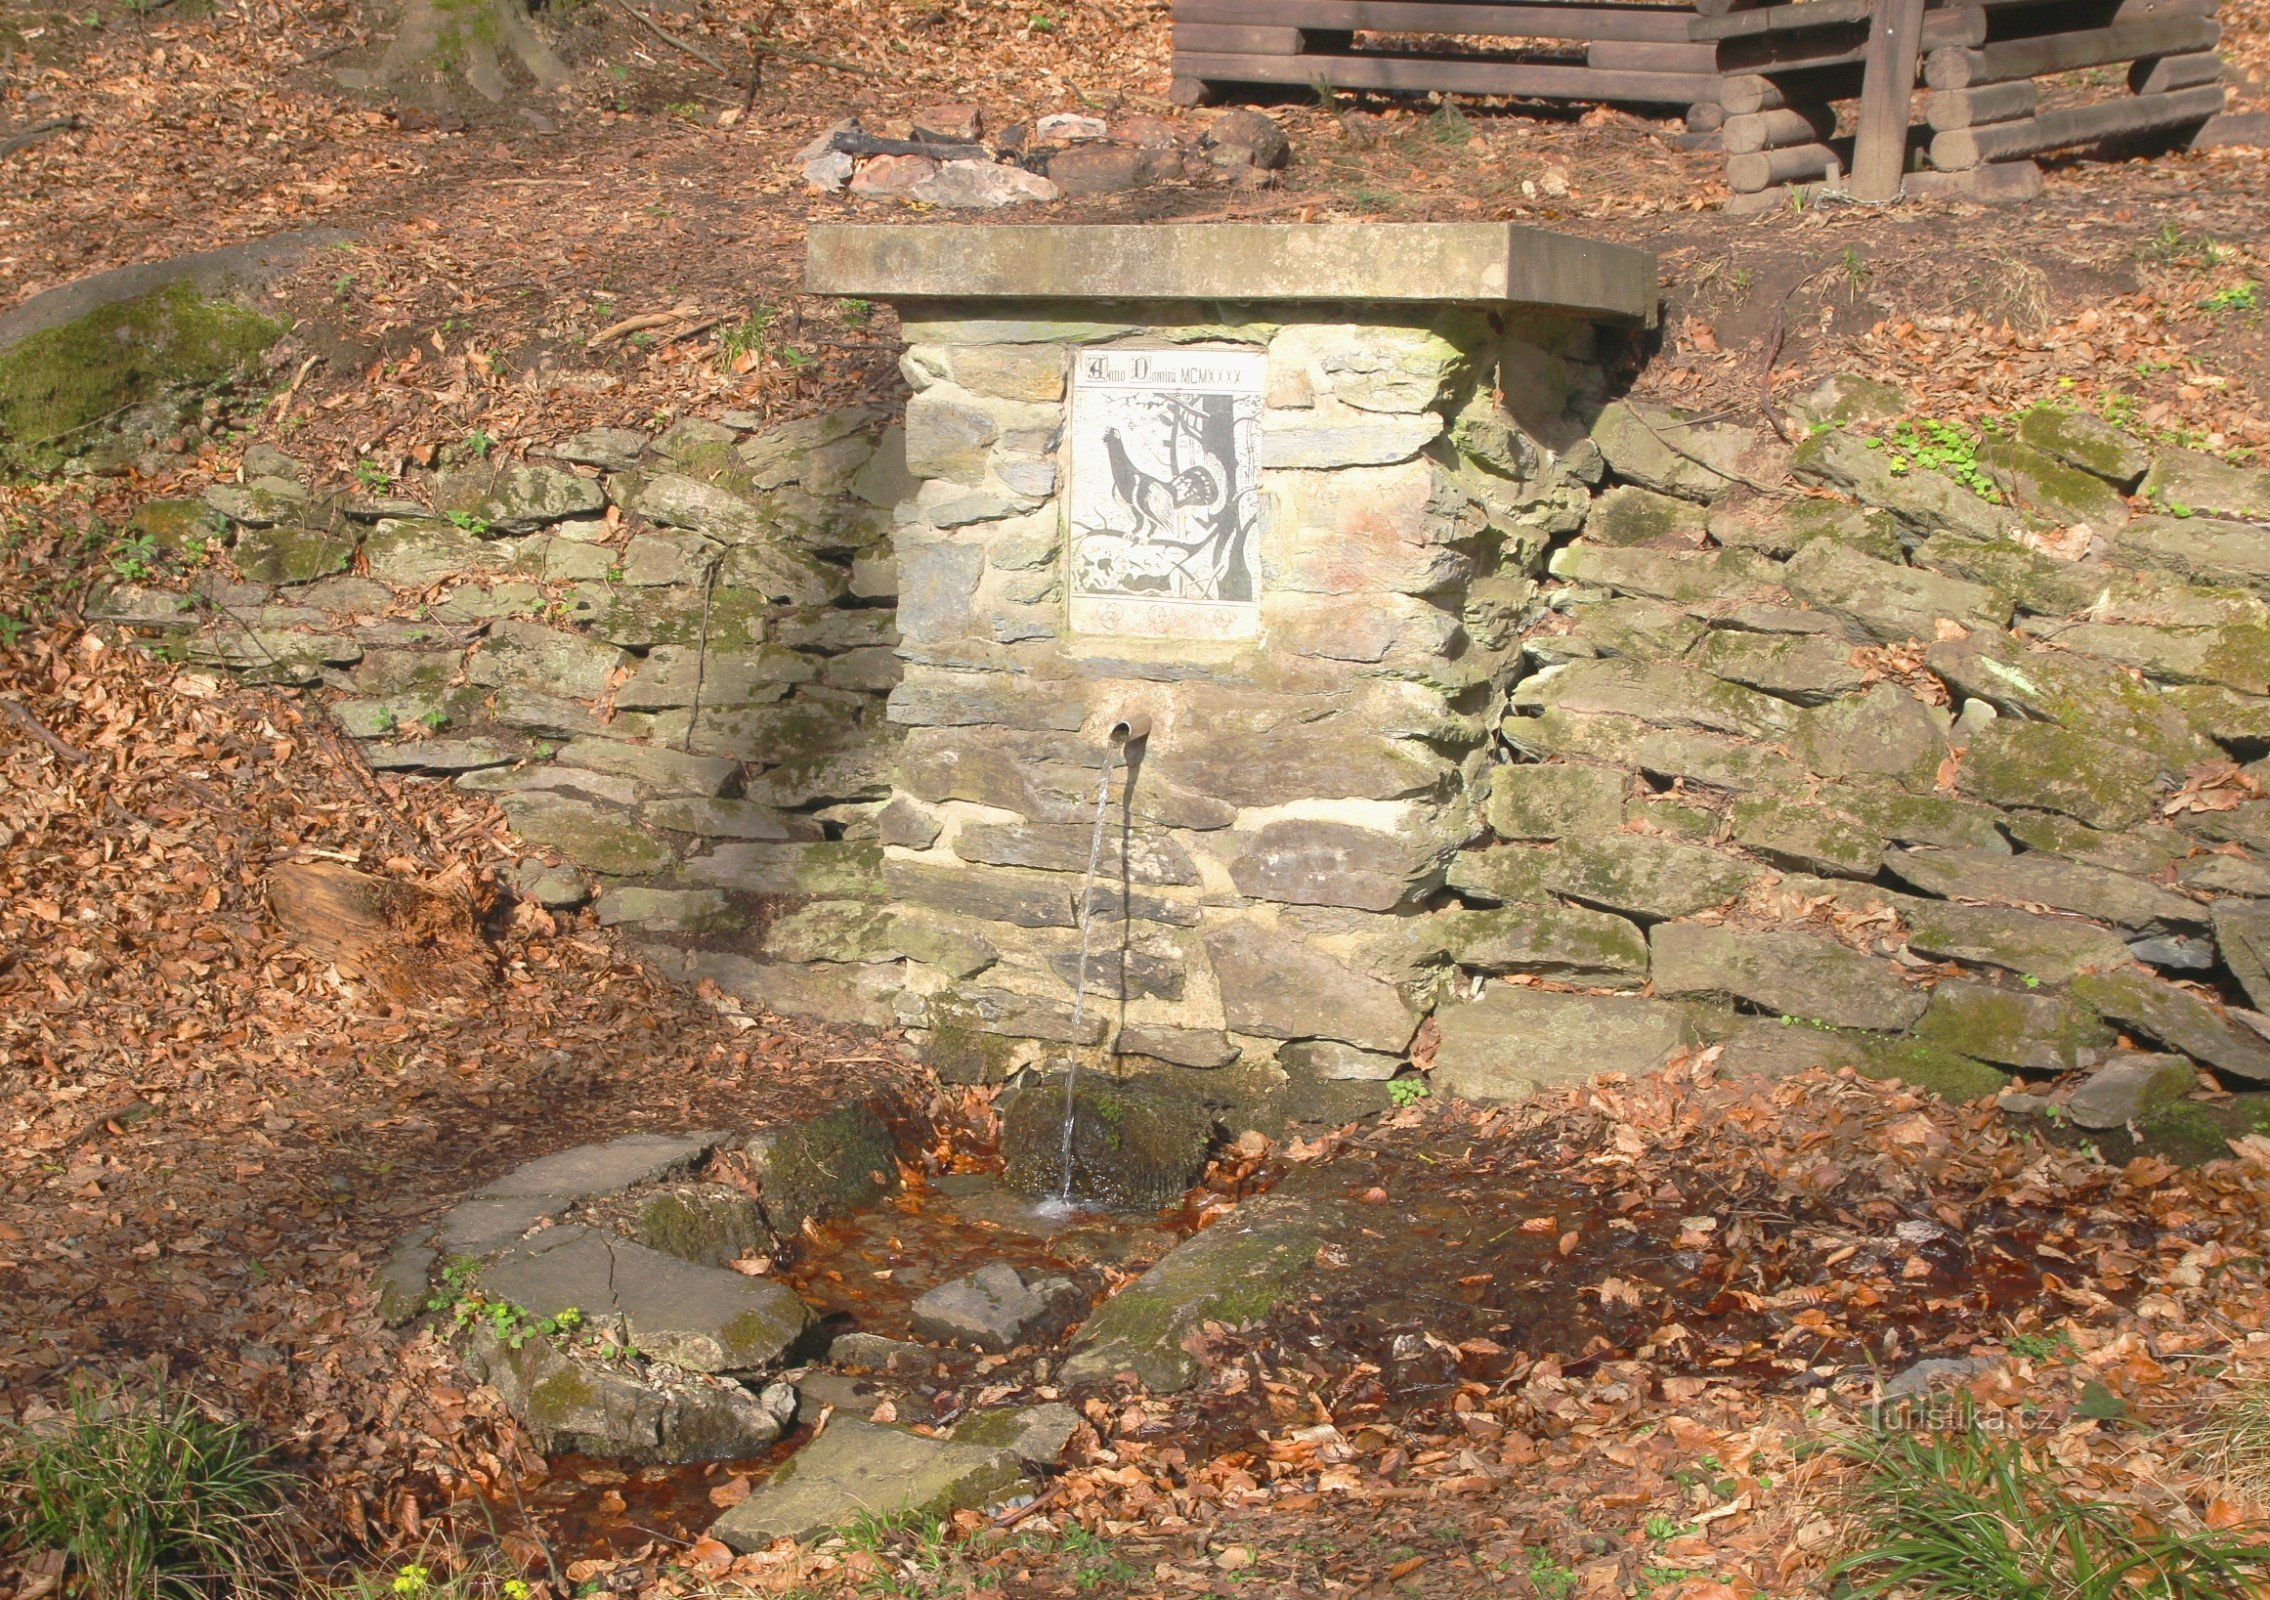 The well at grouse